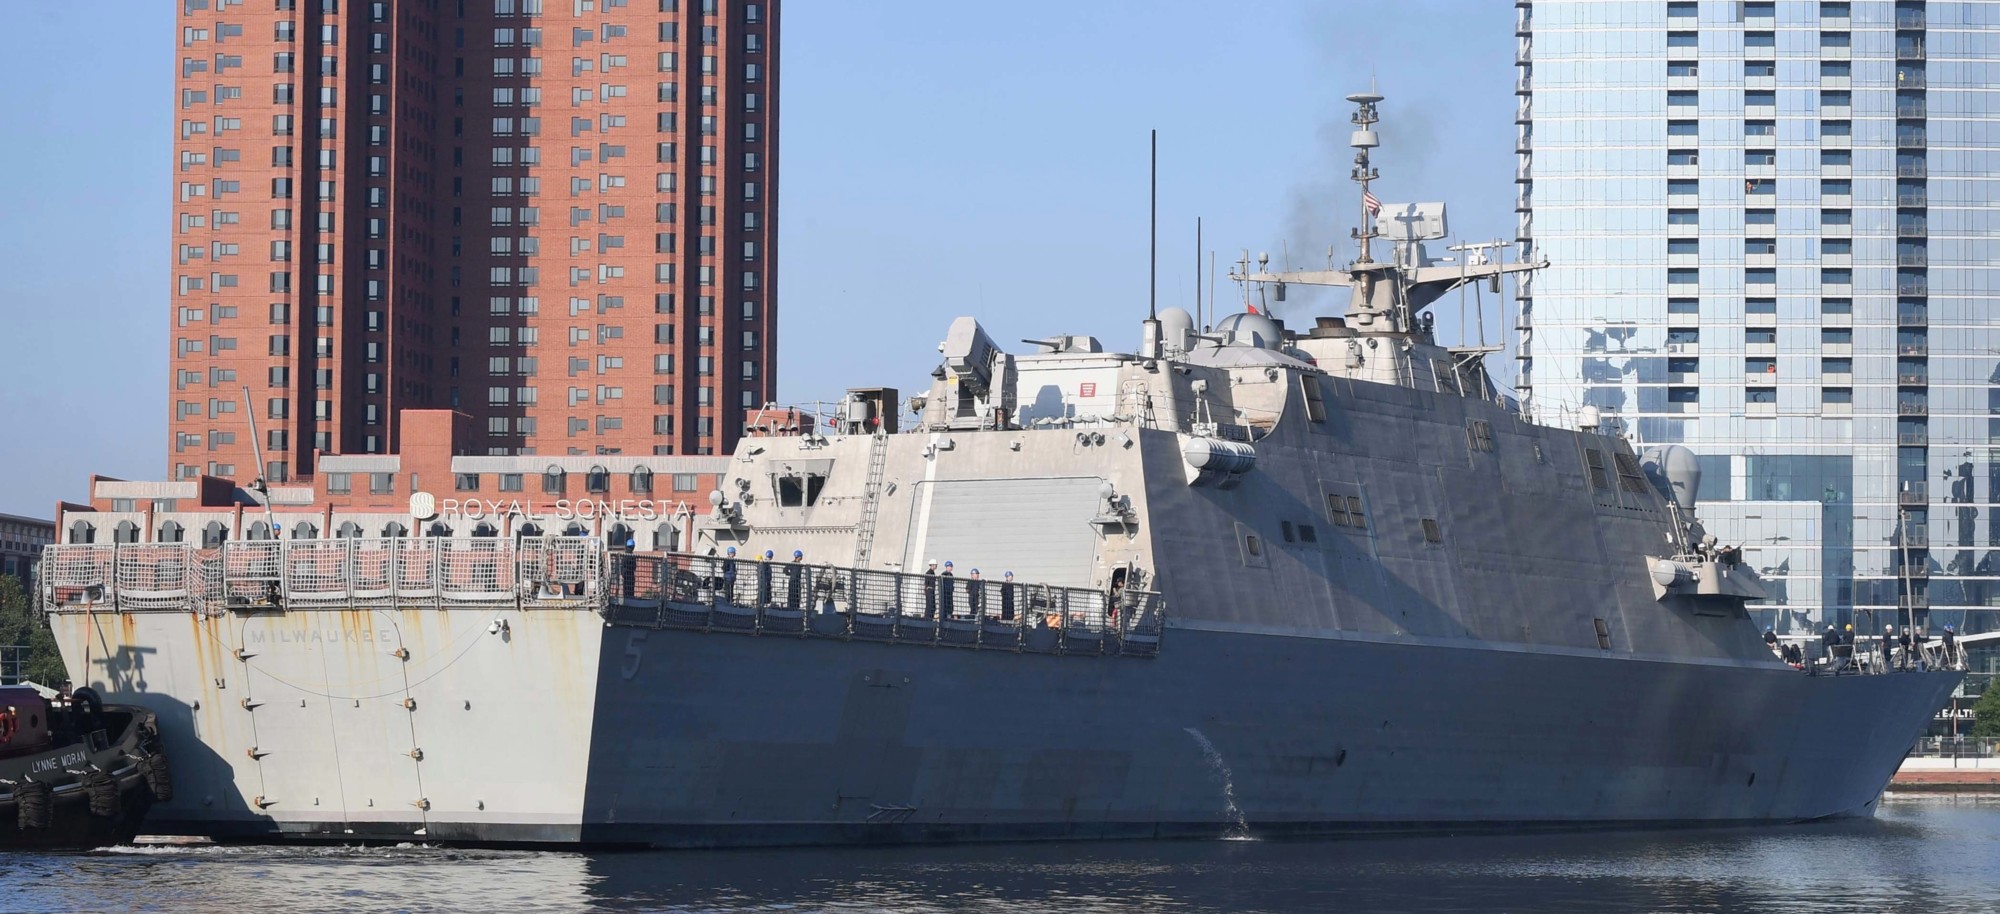 lcs-5 uss milwaukee freedom class littoral combat ship us navy 45 baltimore maryland